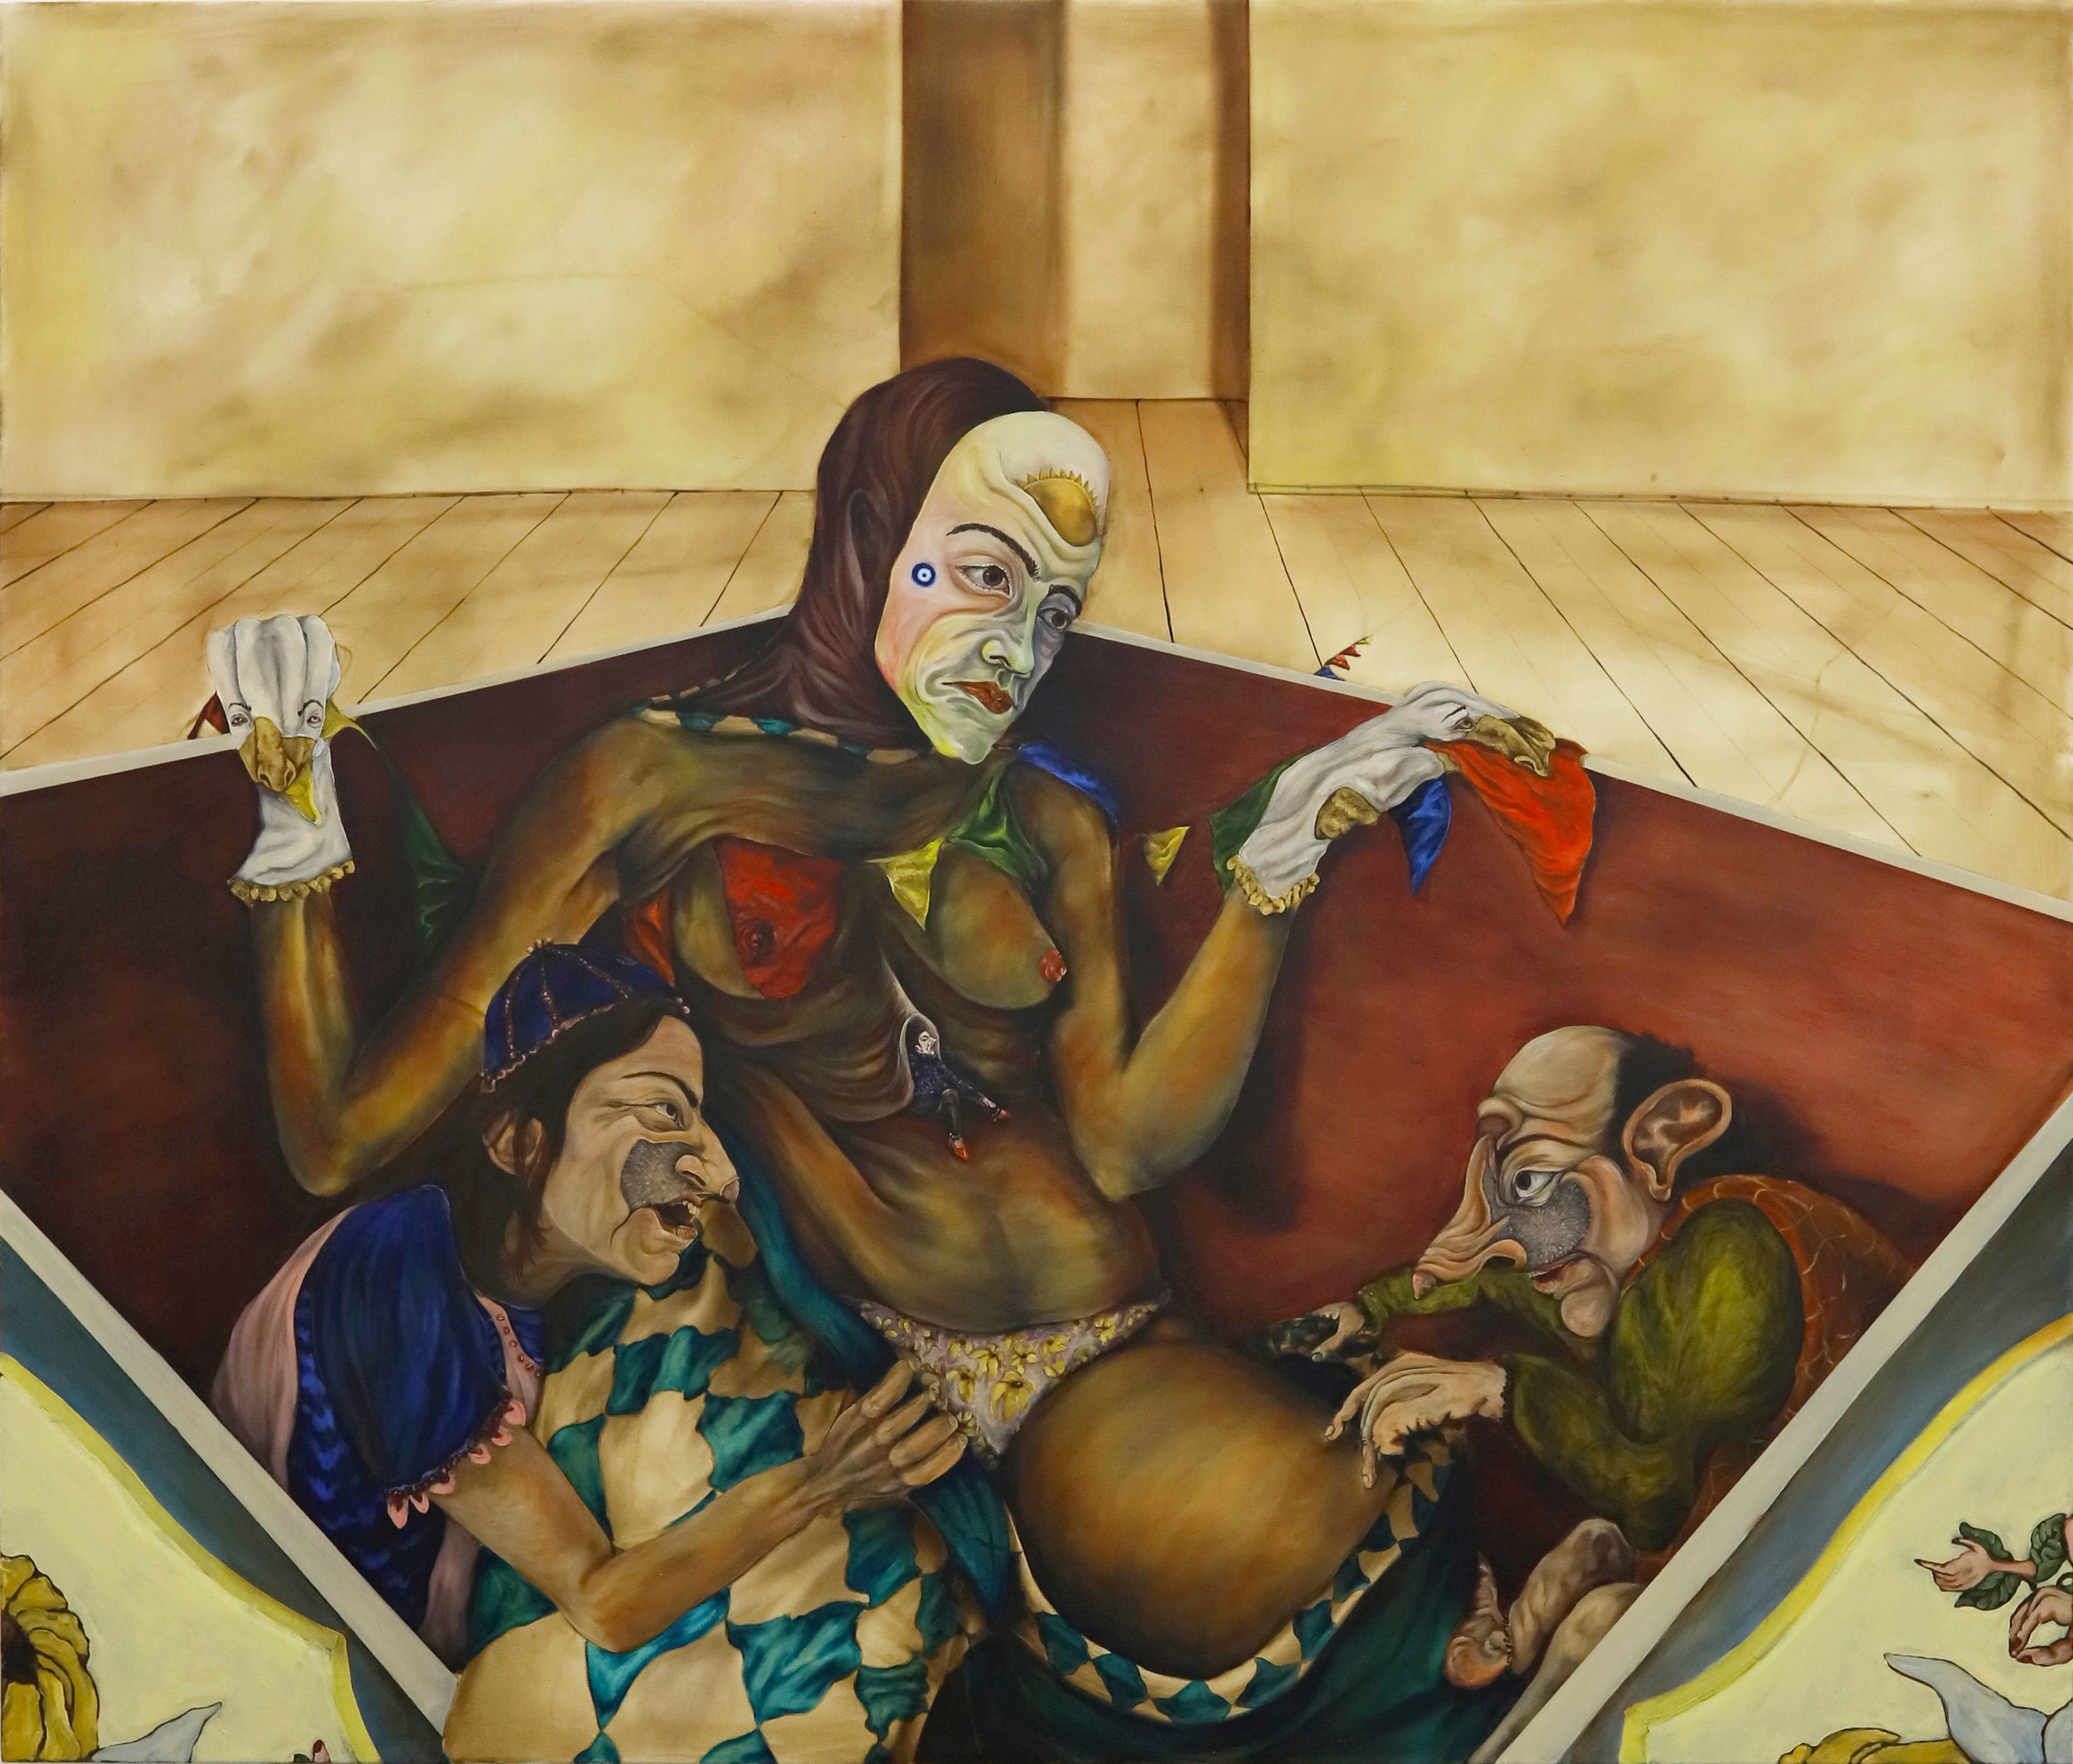   Inhabited Props in a Box   2019  Oil on canvas  170 x 200 cm 